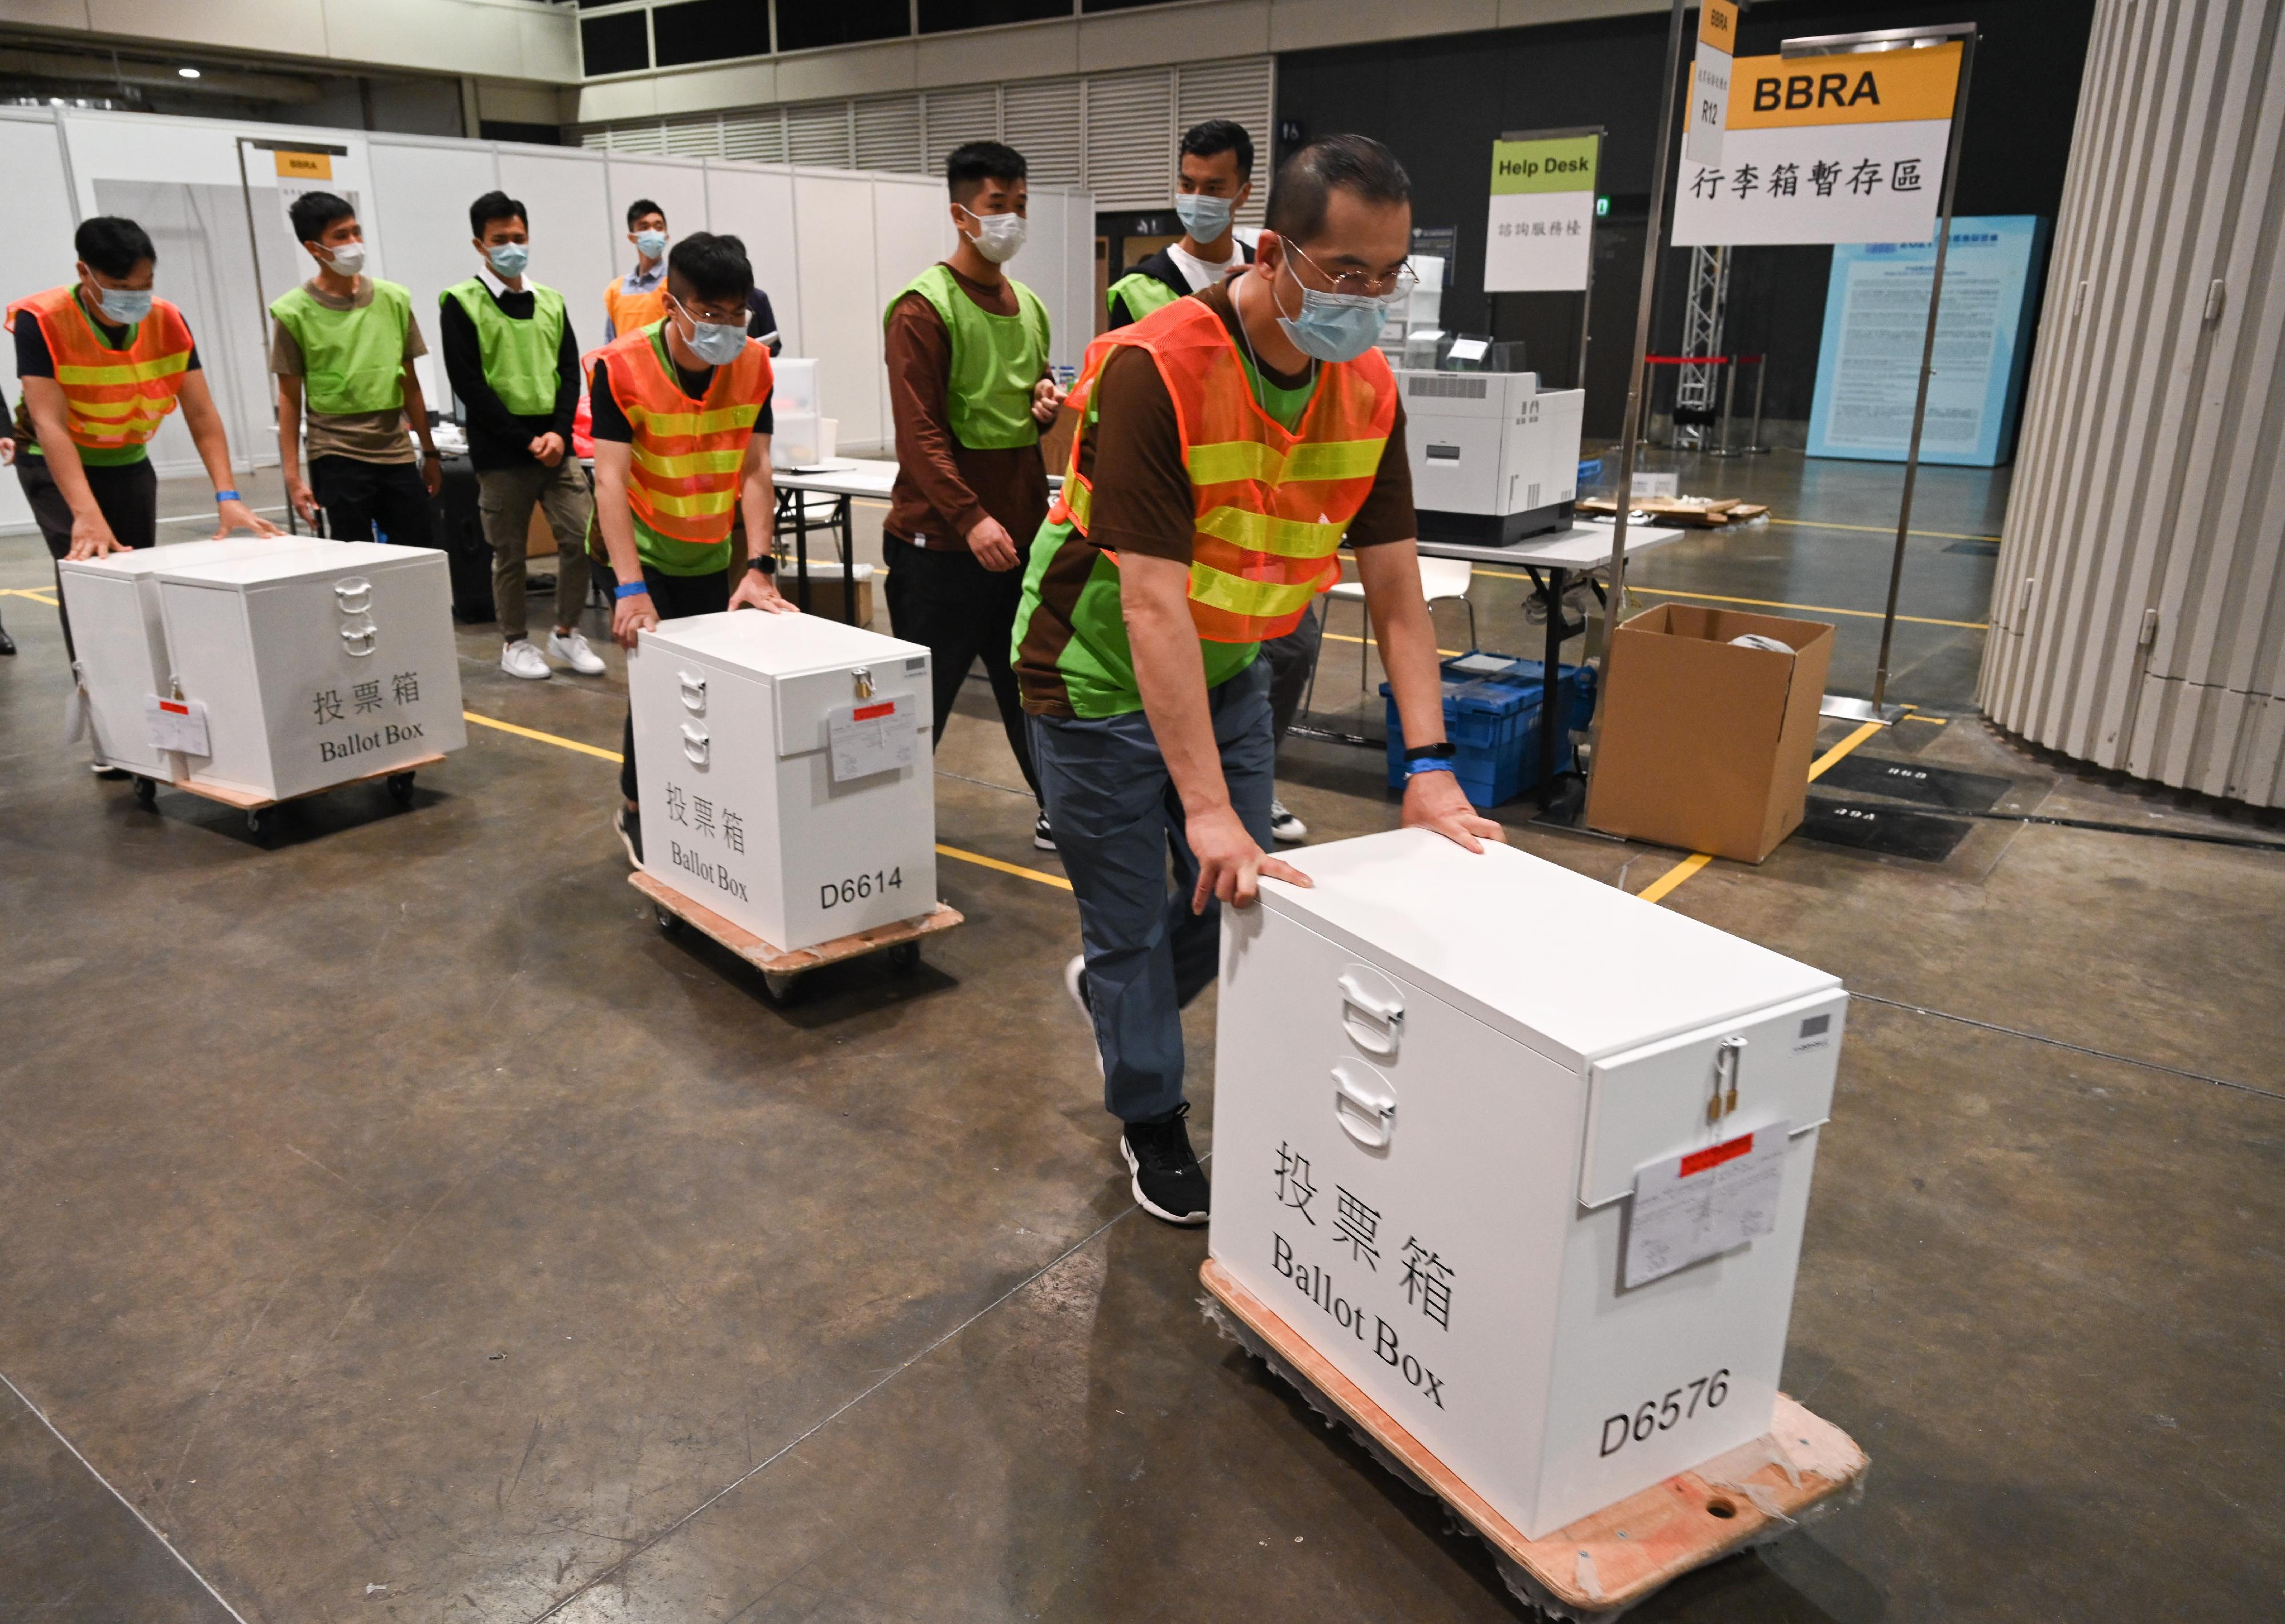 The Chairman of the Electoral Affairs Commission, Mr Justice Barnabas Fung Wah, visited the central counting station of the 2021 Legislative Council General Election at the Hong Kong Convention and Exhibition Centre and inspected the training sessions with practical sessions and simulated activities for counting staff. Photo shows the arrival of mock ballot boxes at the central counting station.